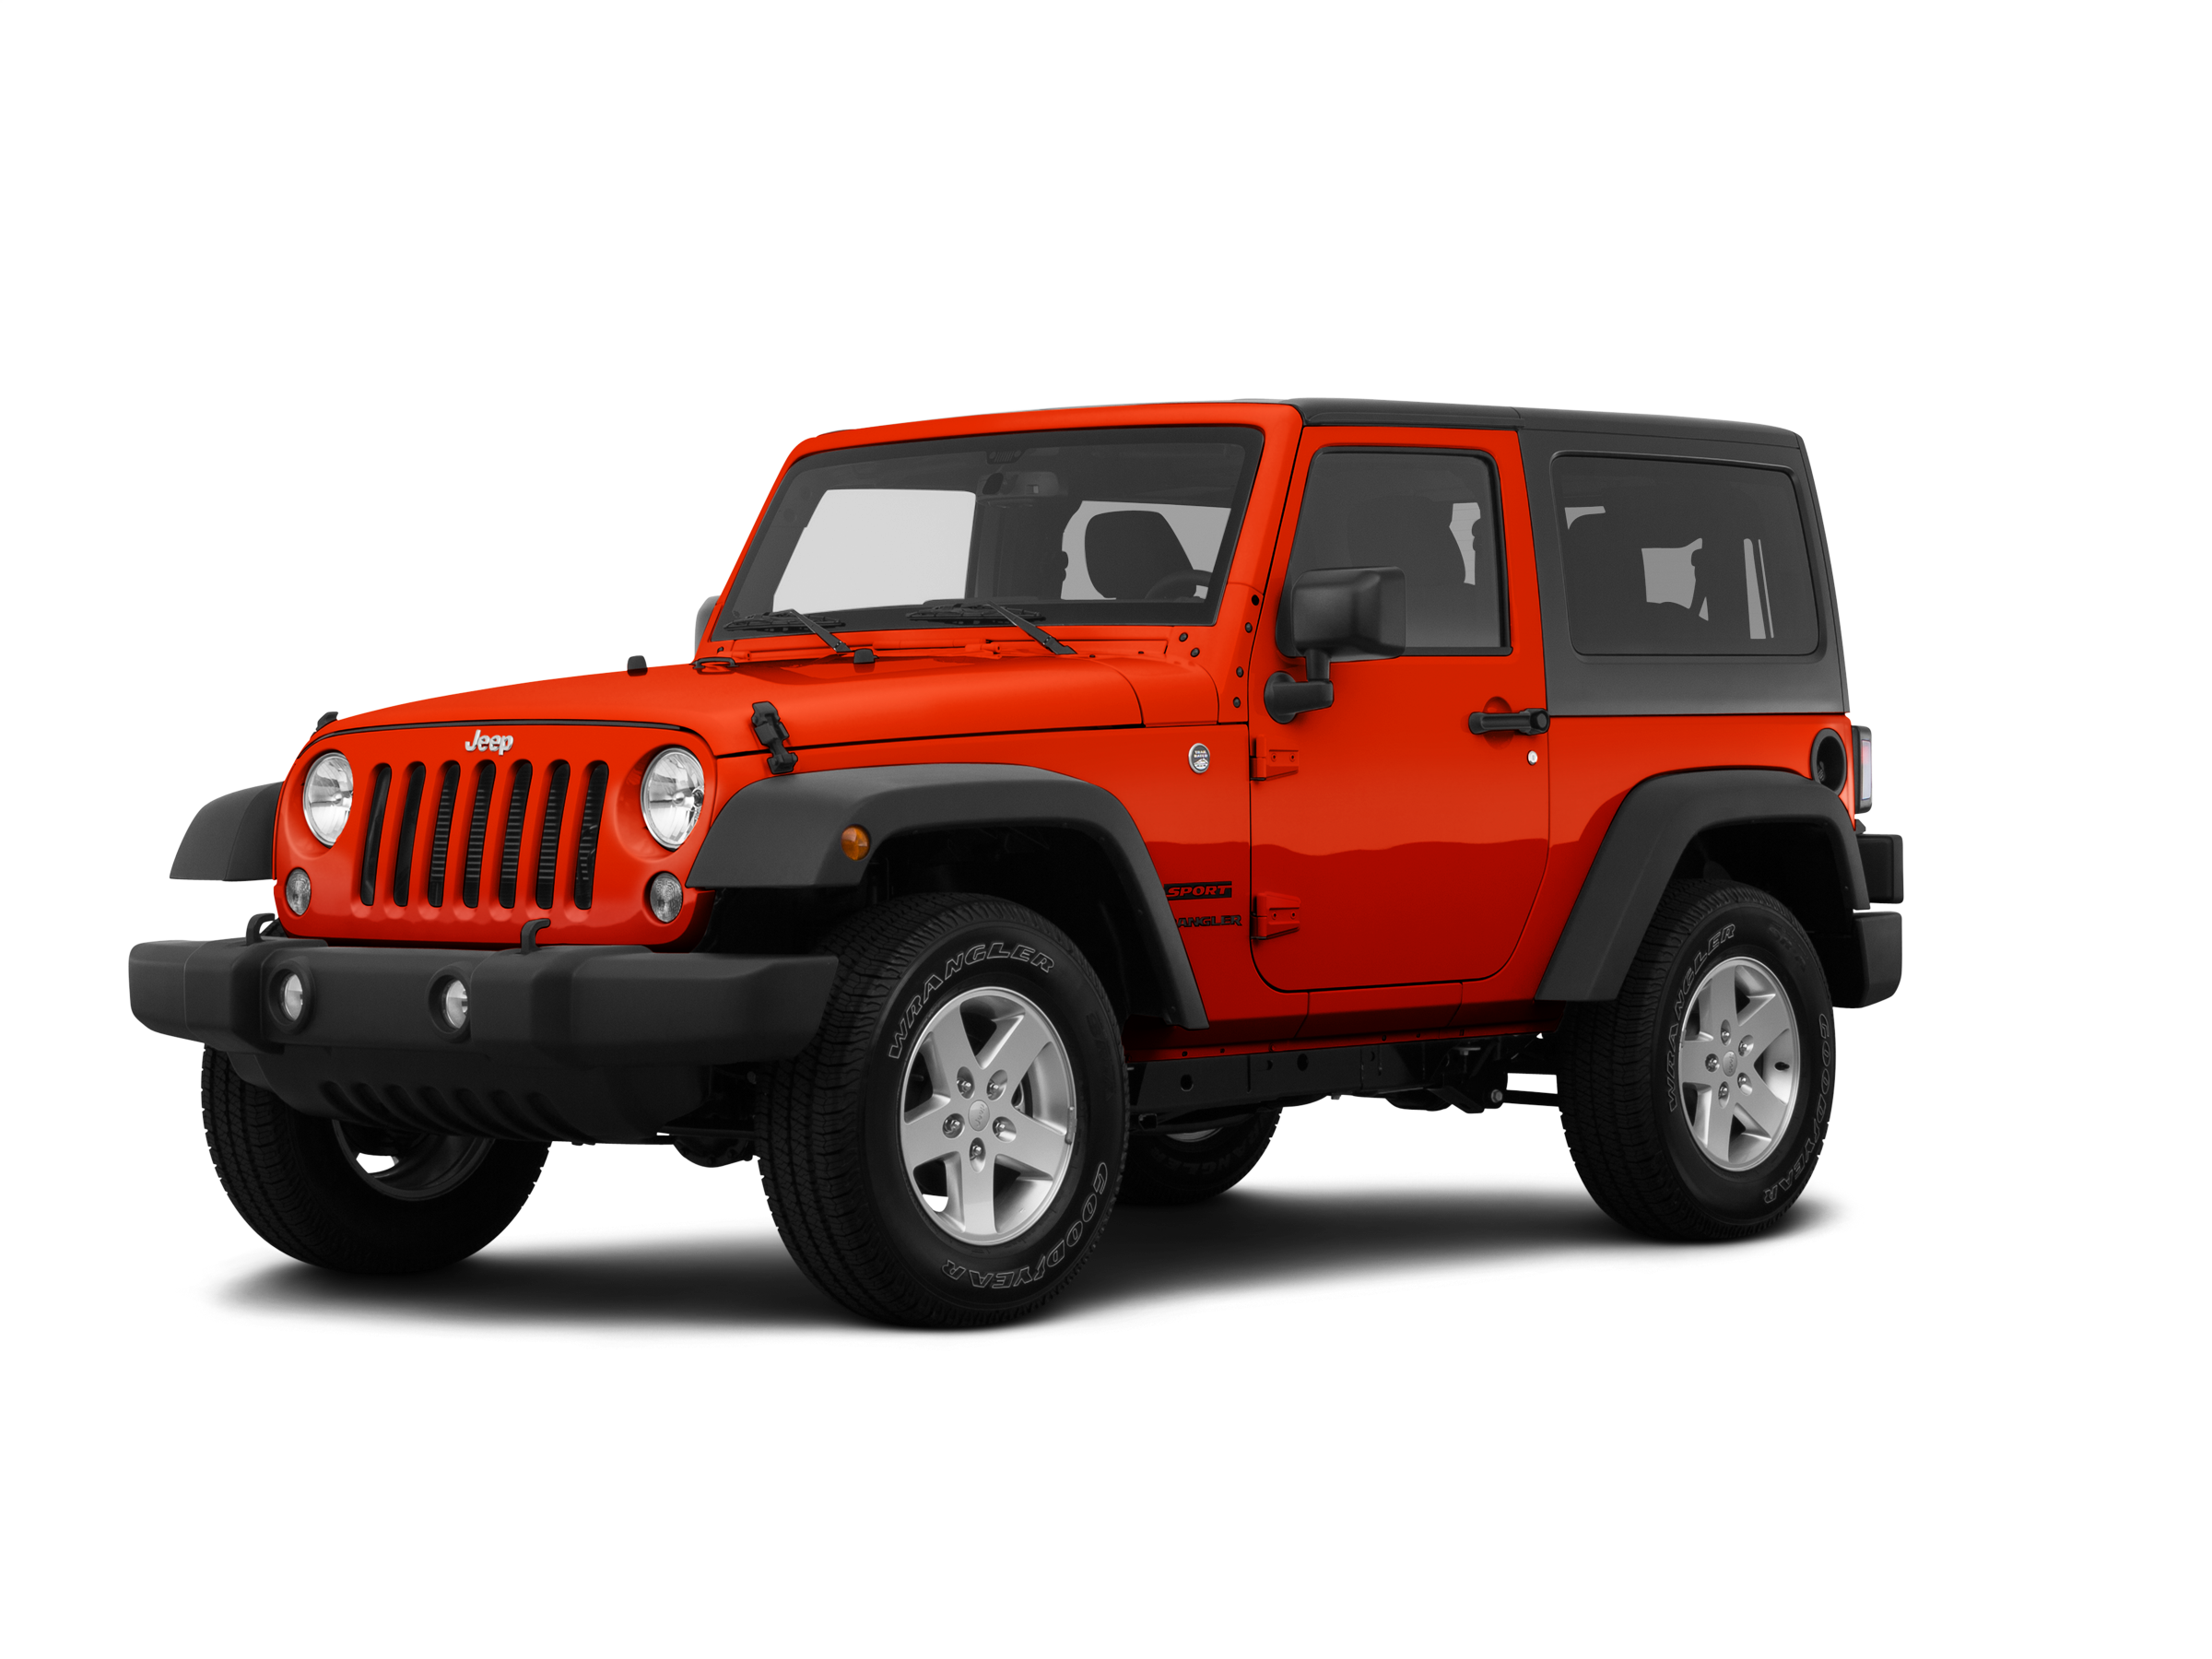 2016 Jeep Wrangler Reviews, Ratings, Prices Consumer Reports |  